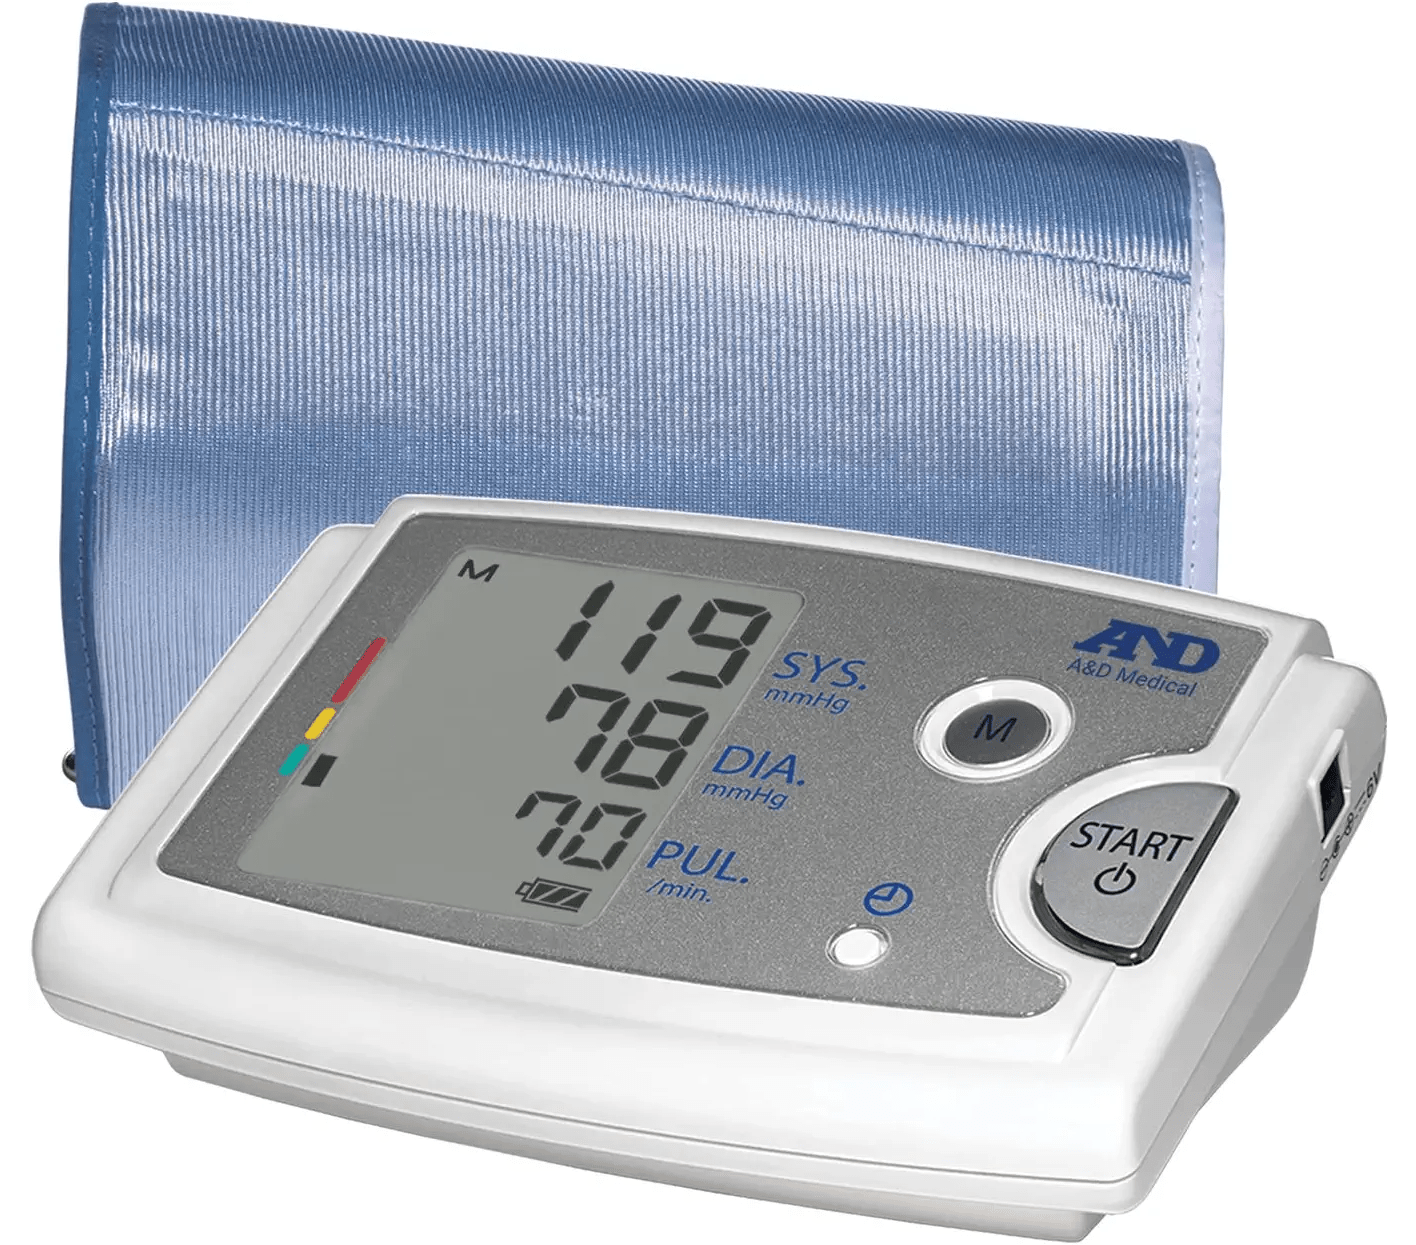 https://cdn.shopify.com/s/files/1/0904/0726/products/lifesource-automatic-blood-pressure-a-d-medical-ua-789ac-automatic-bp-monitor-extra-large-cuff-32243517849773.png?v=1663171596